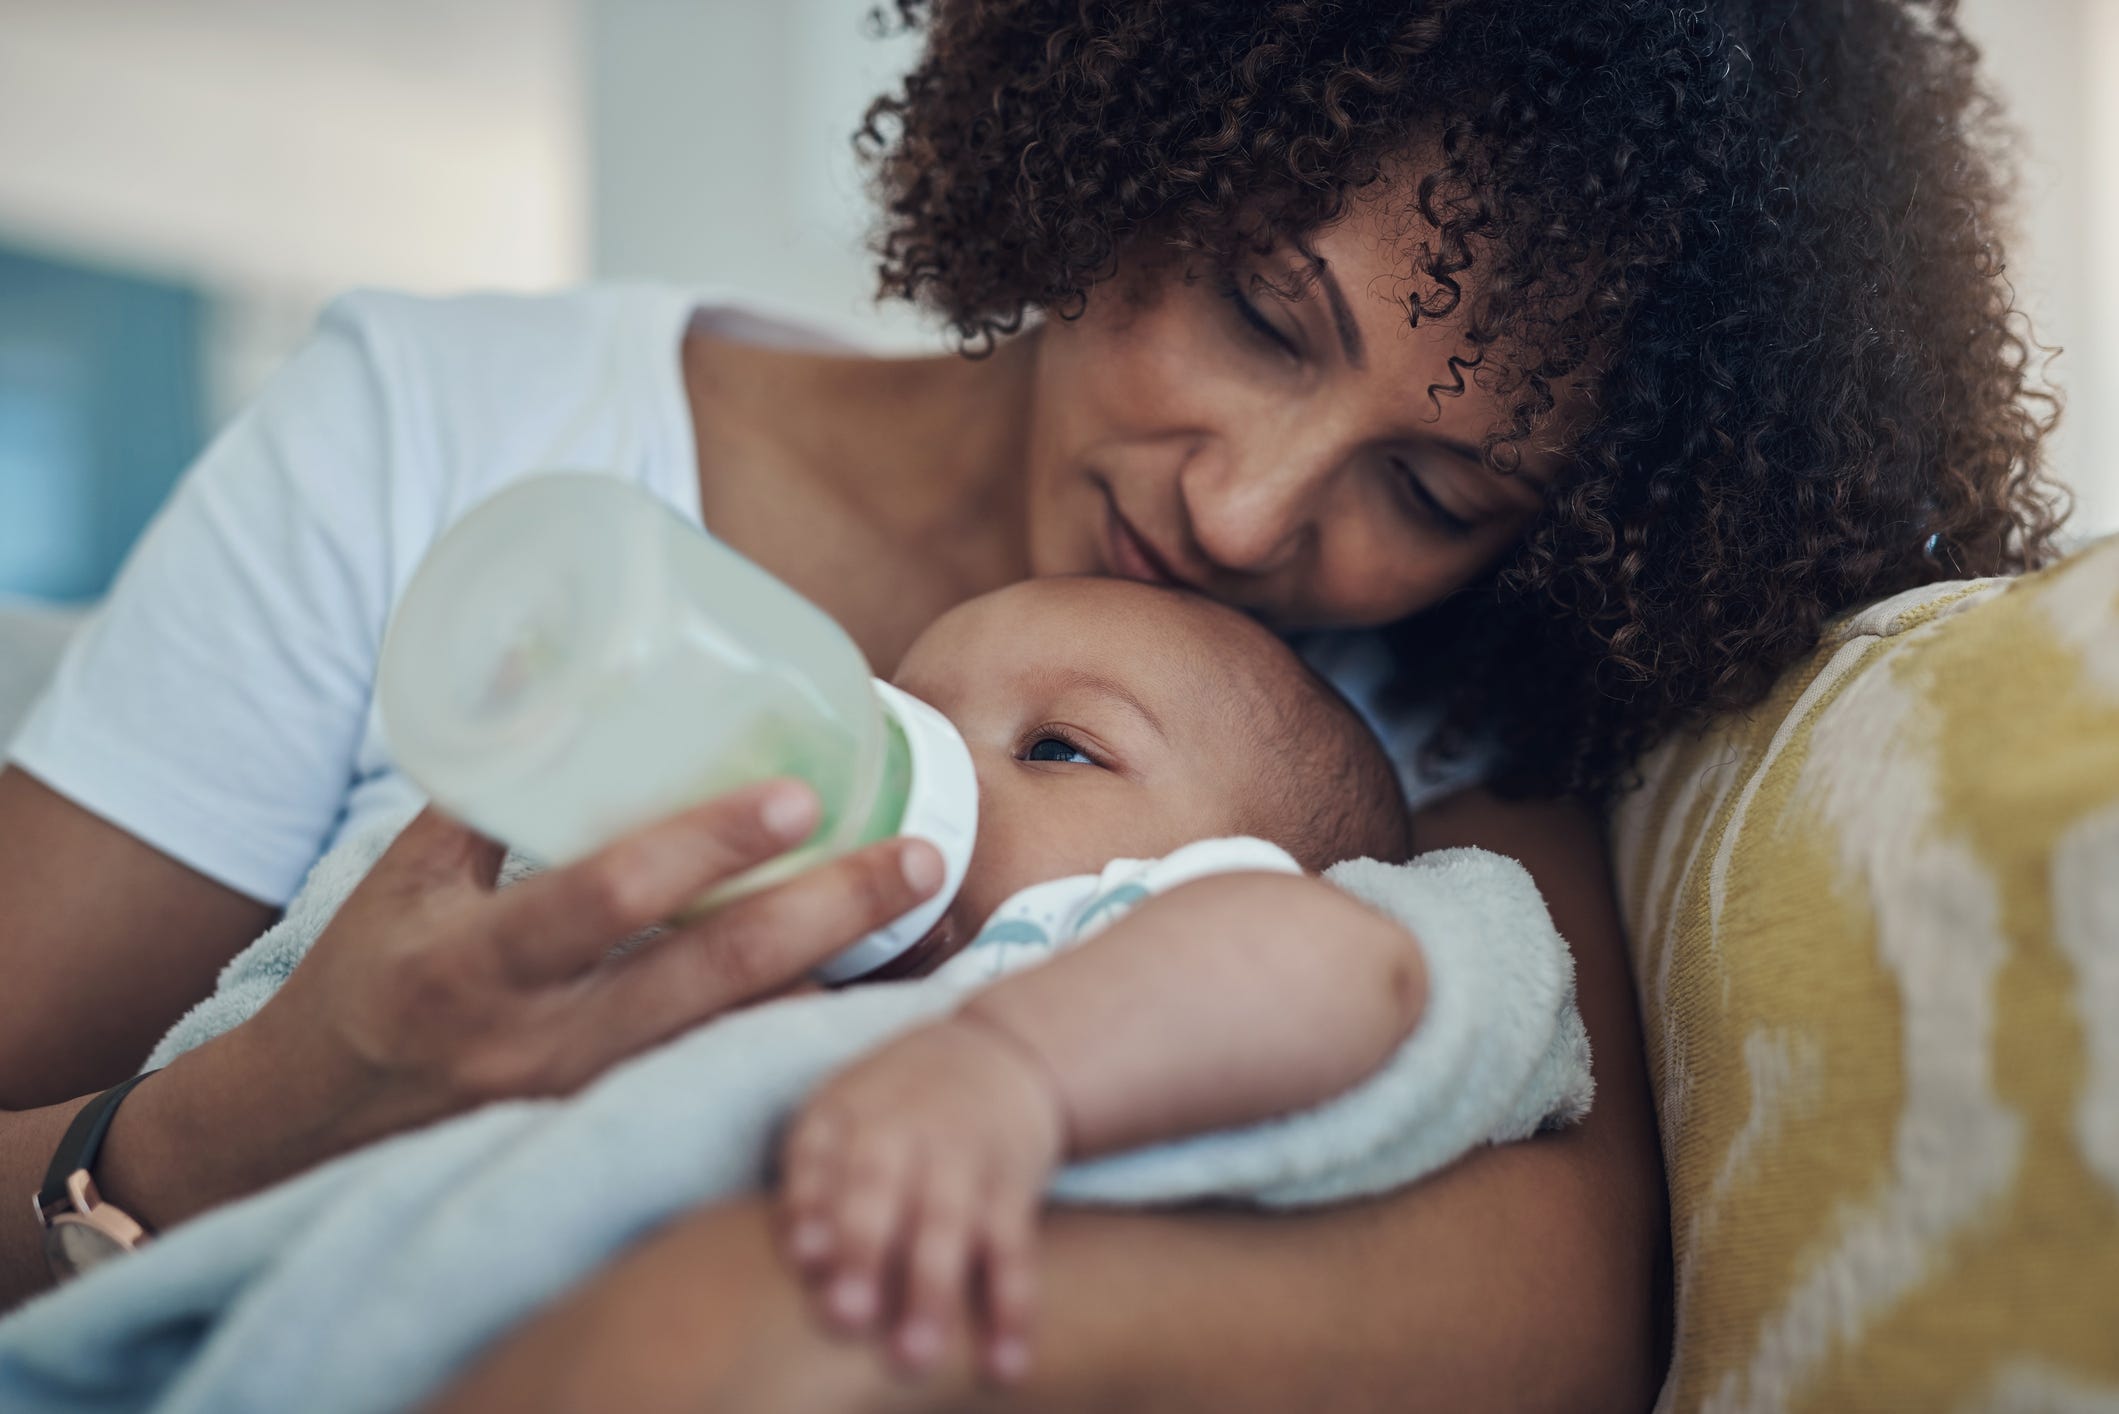 2023 tax season guide for new parents: What to know about the Child Tax Credit and more